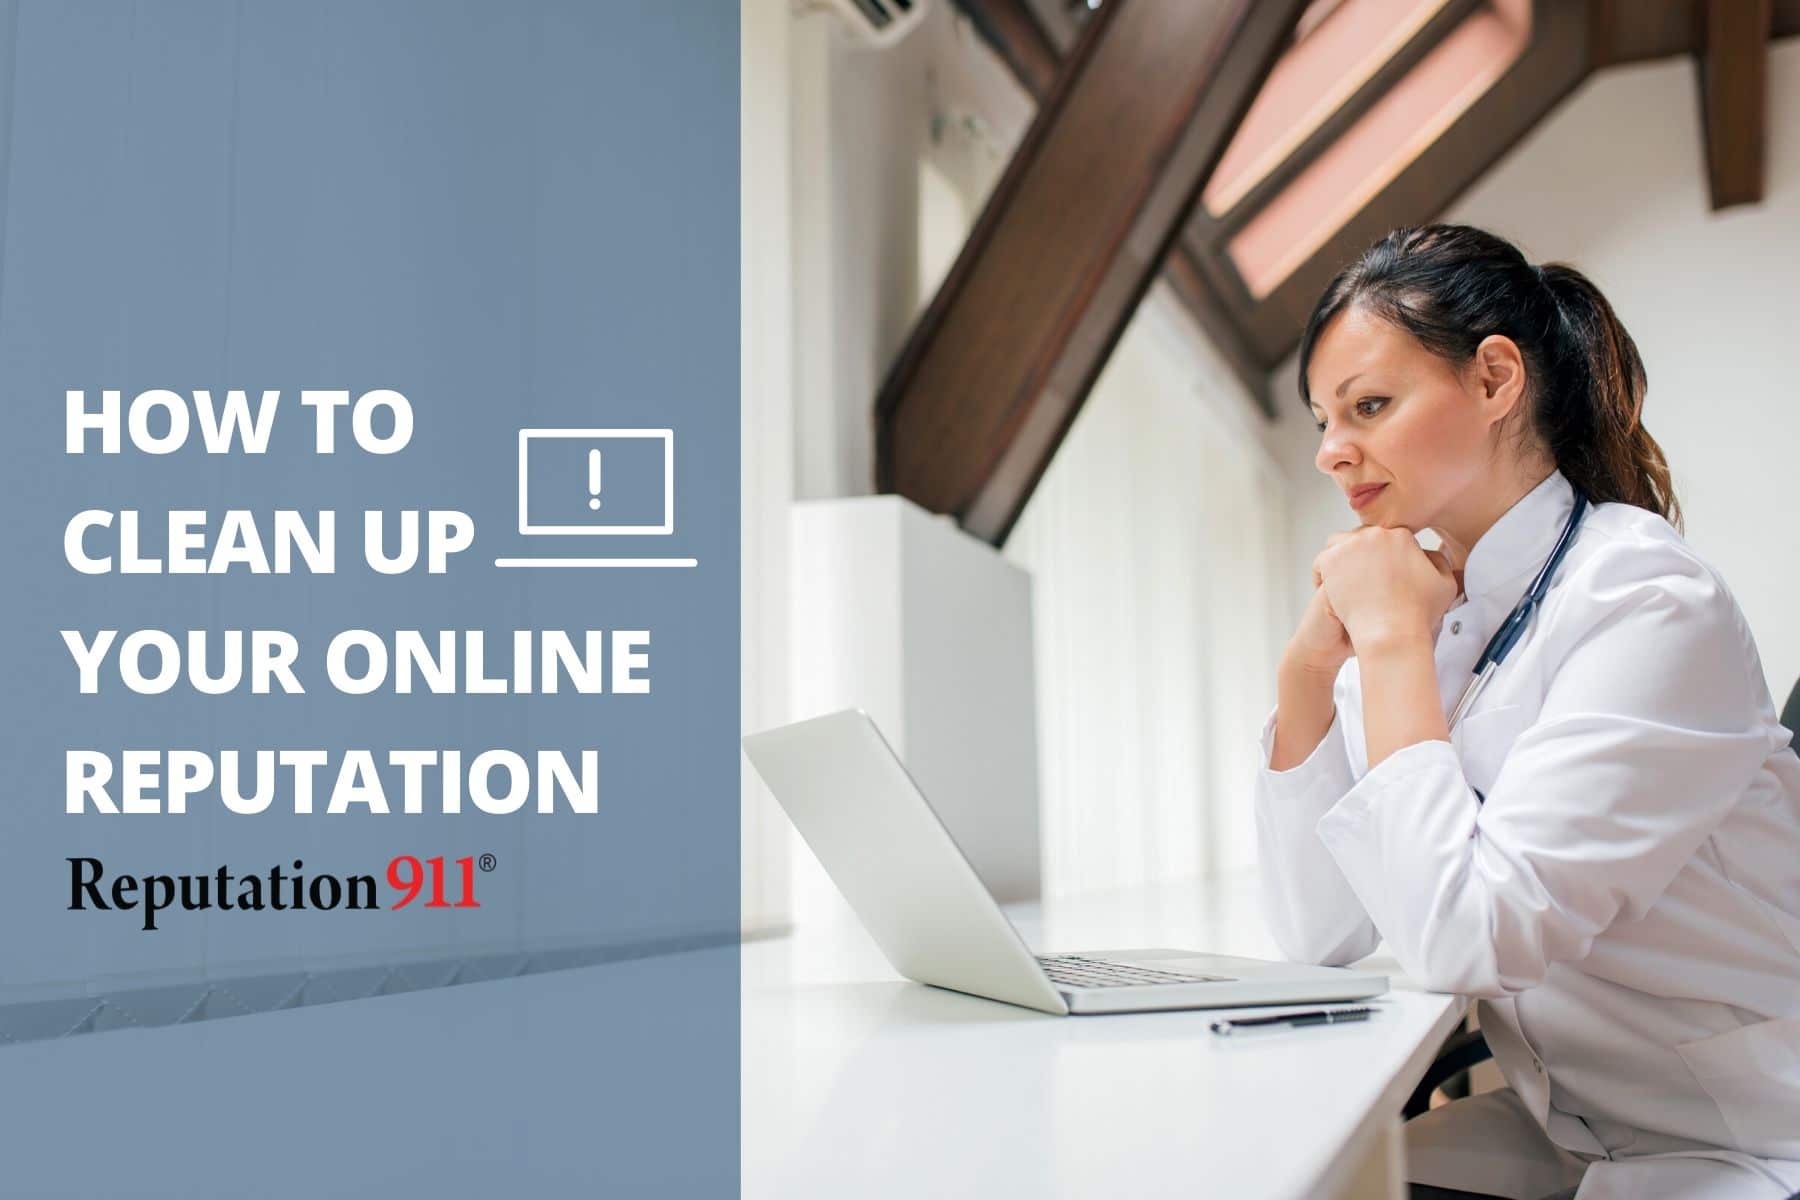 How to Clean Up Your Online Reputation